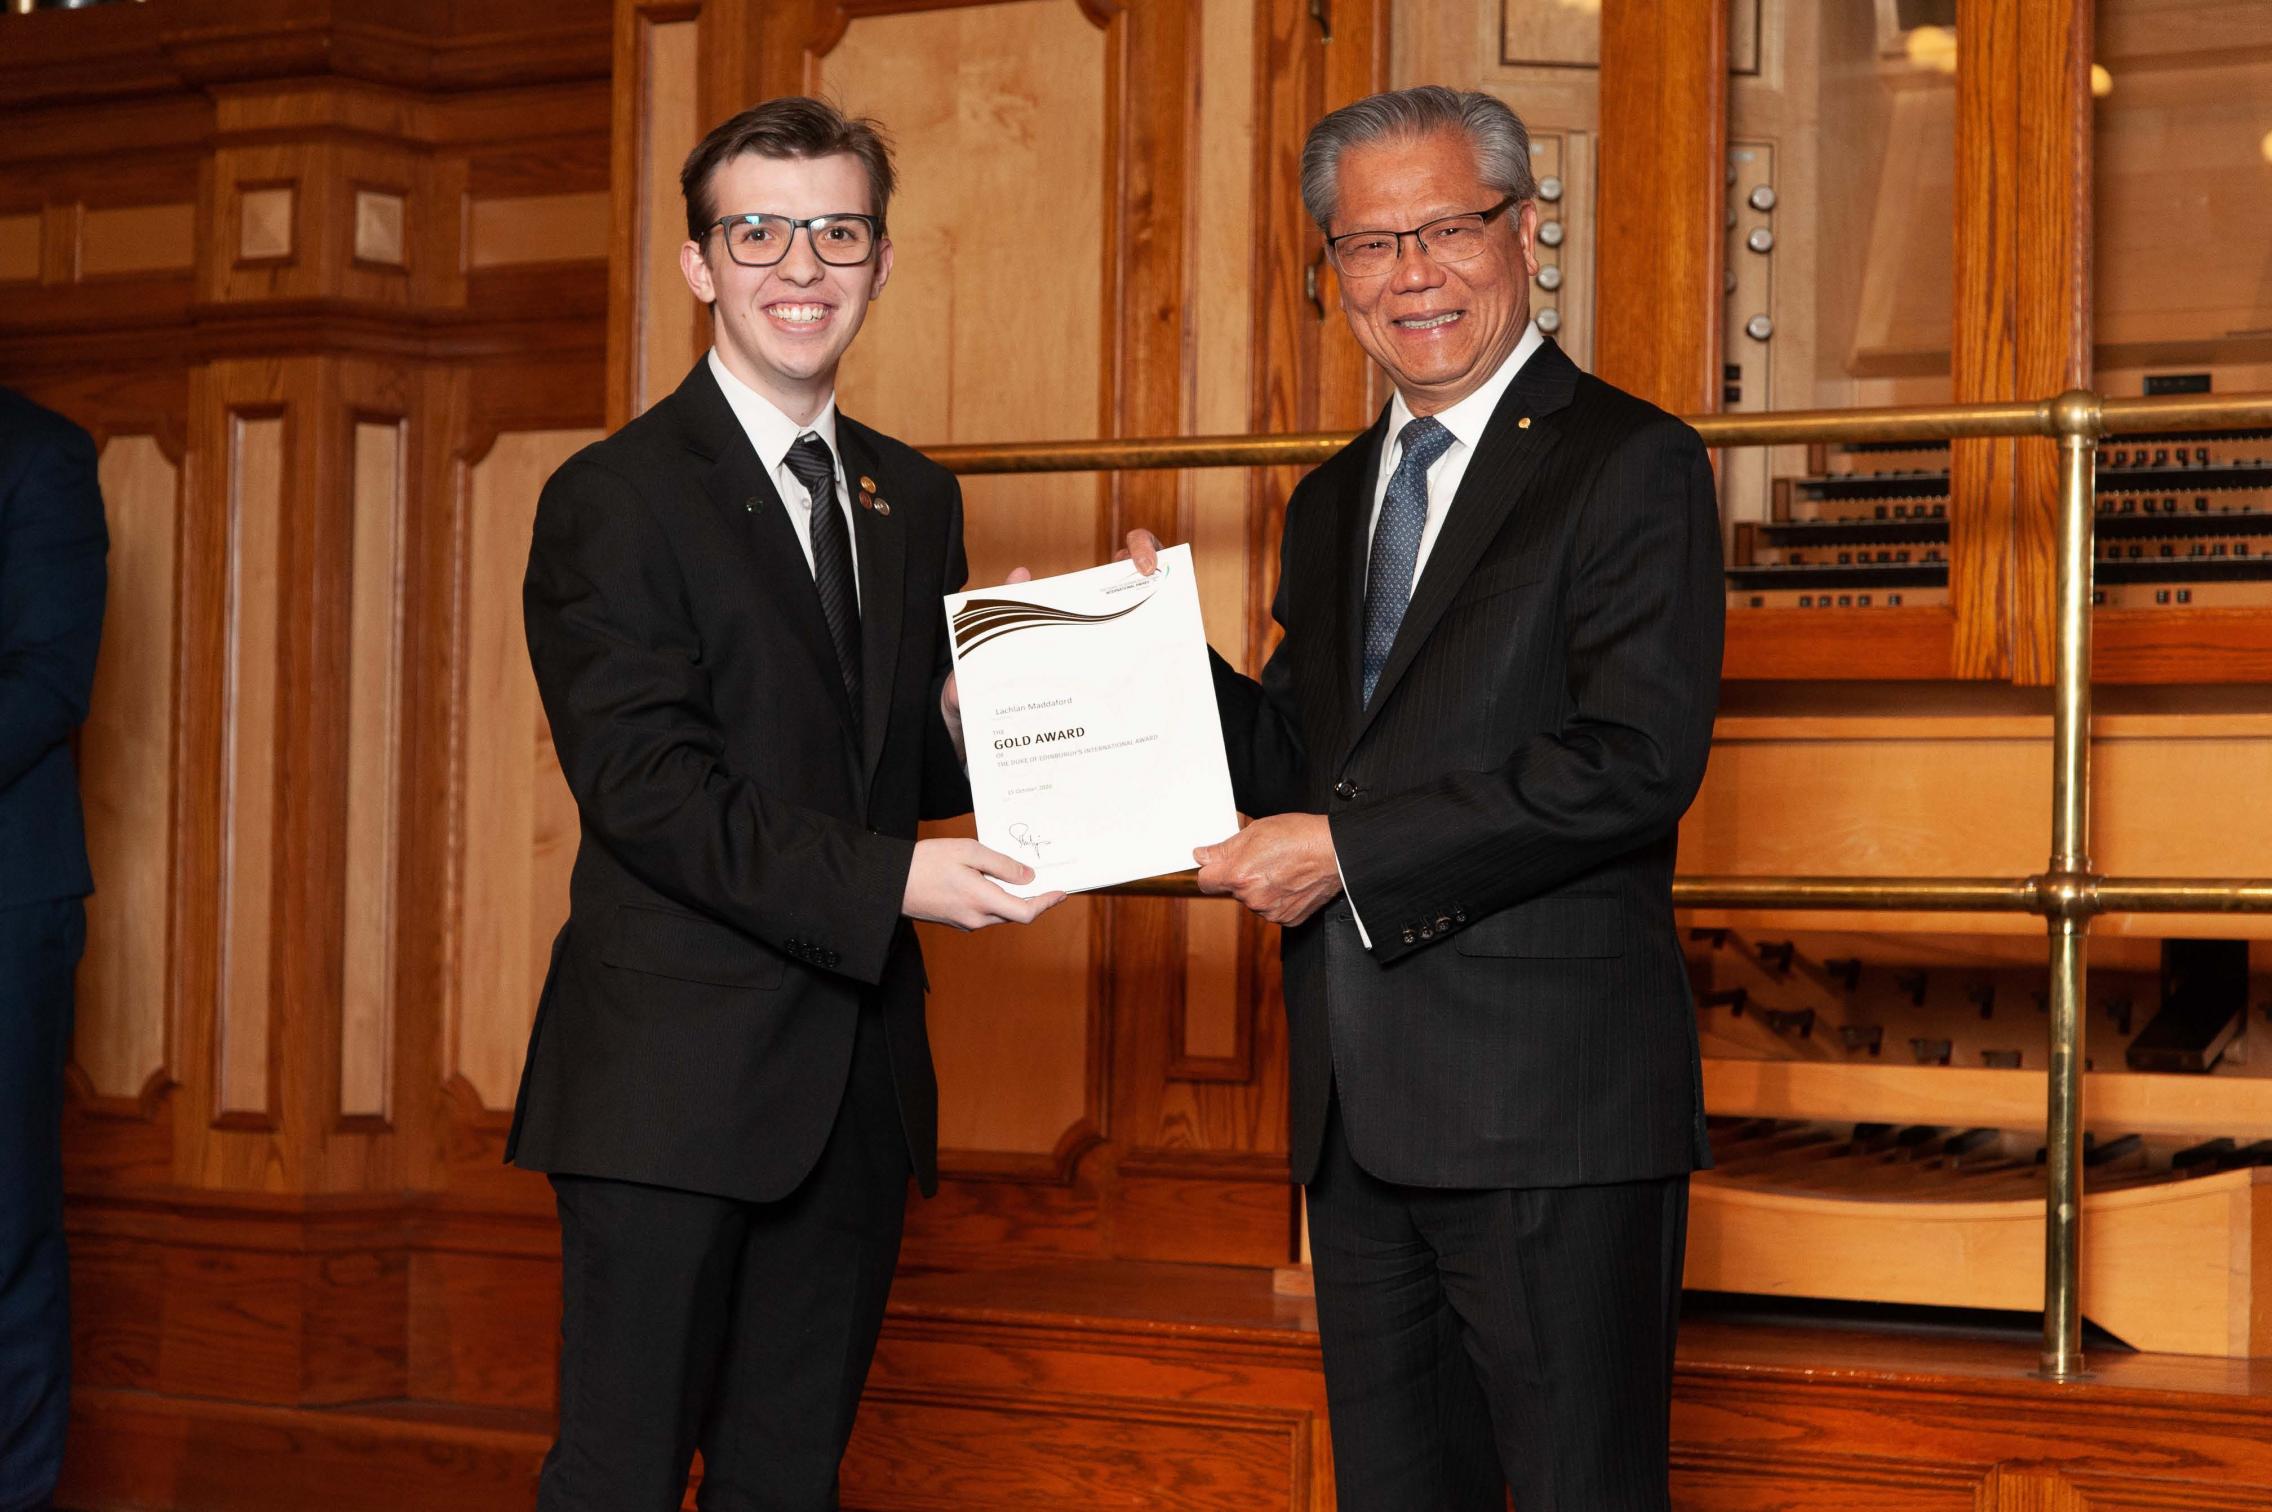 Lachlan Maddaford receiving the Duke of Edinburgh Gold Award from the Governor